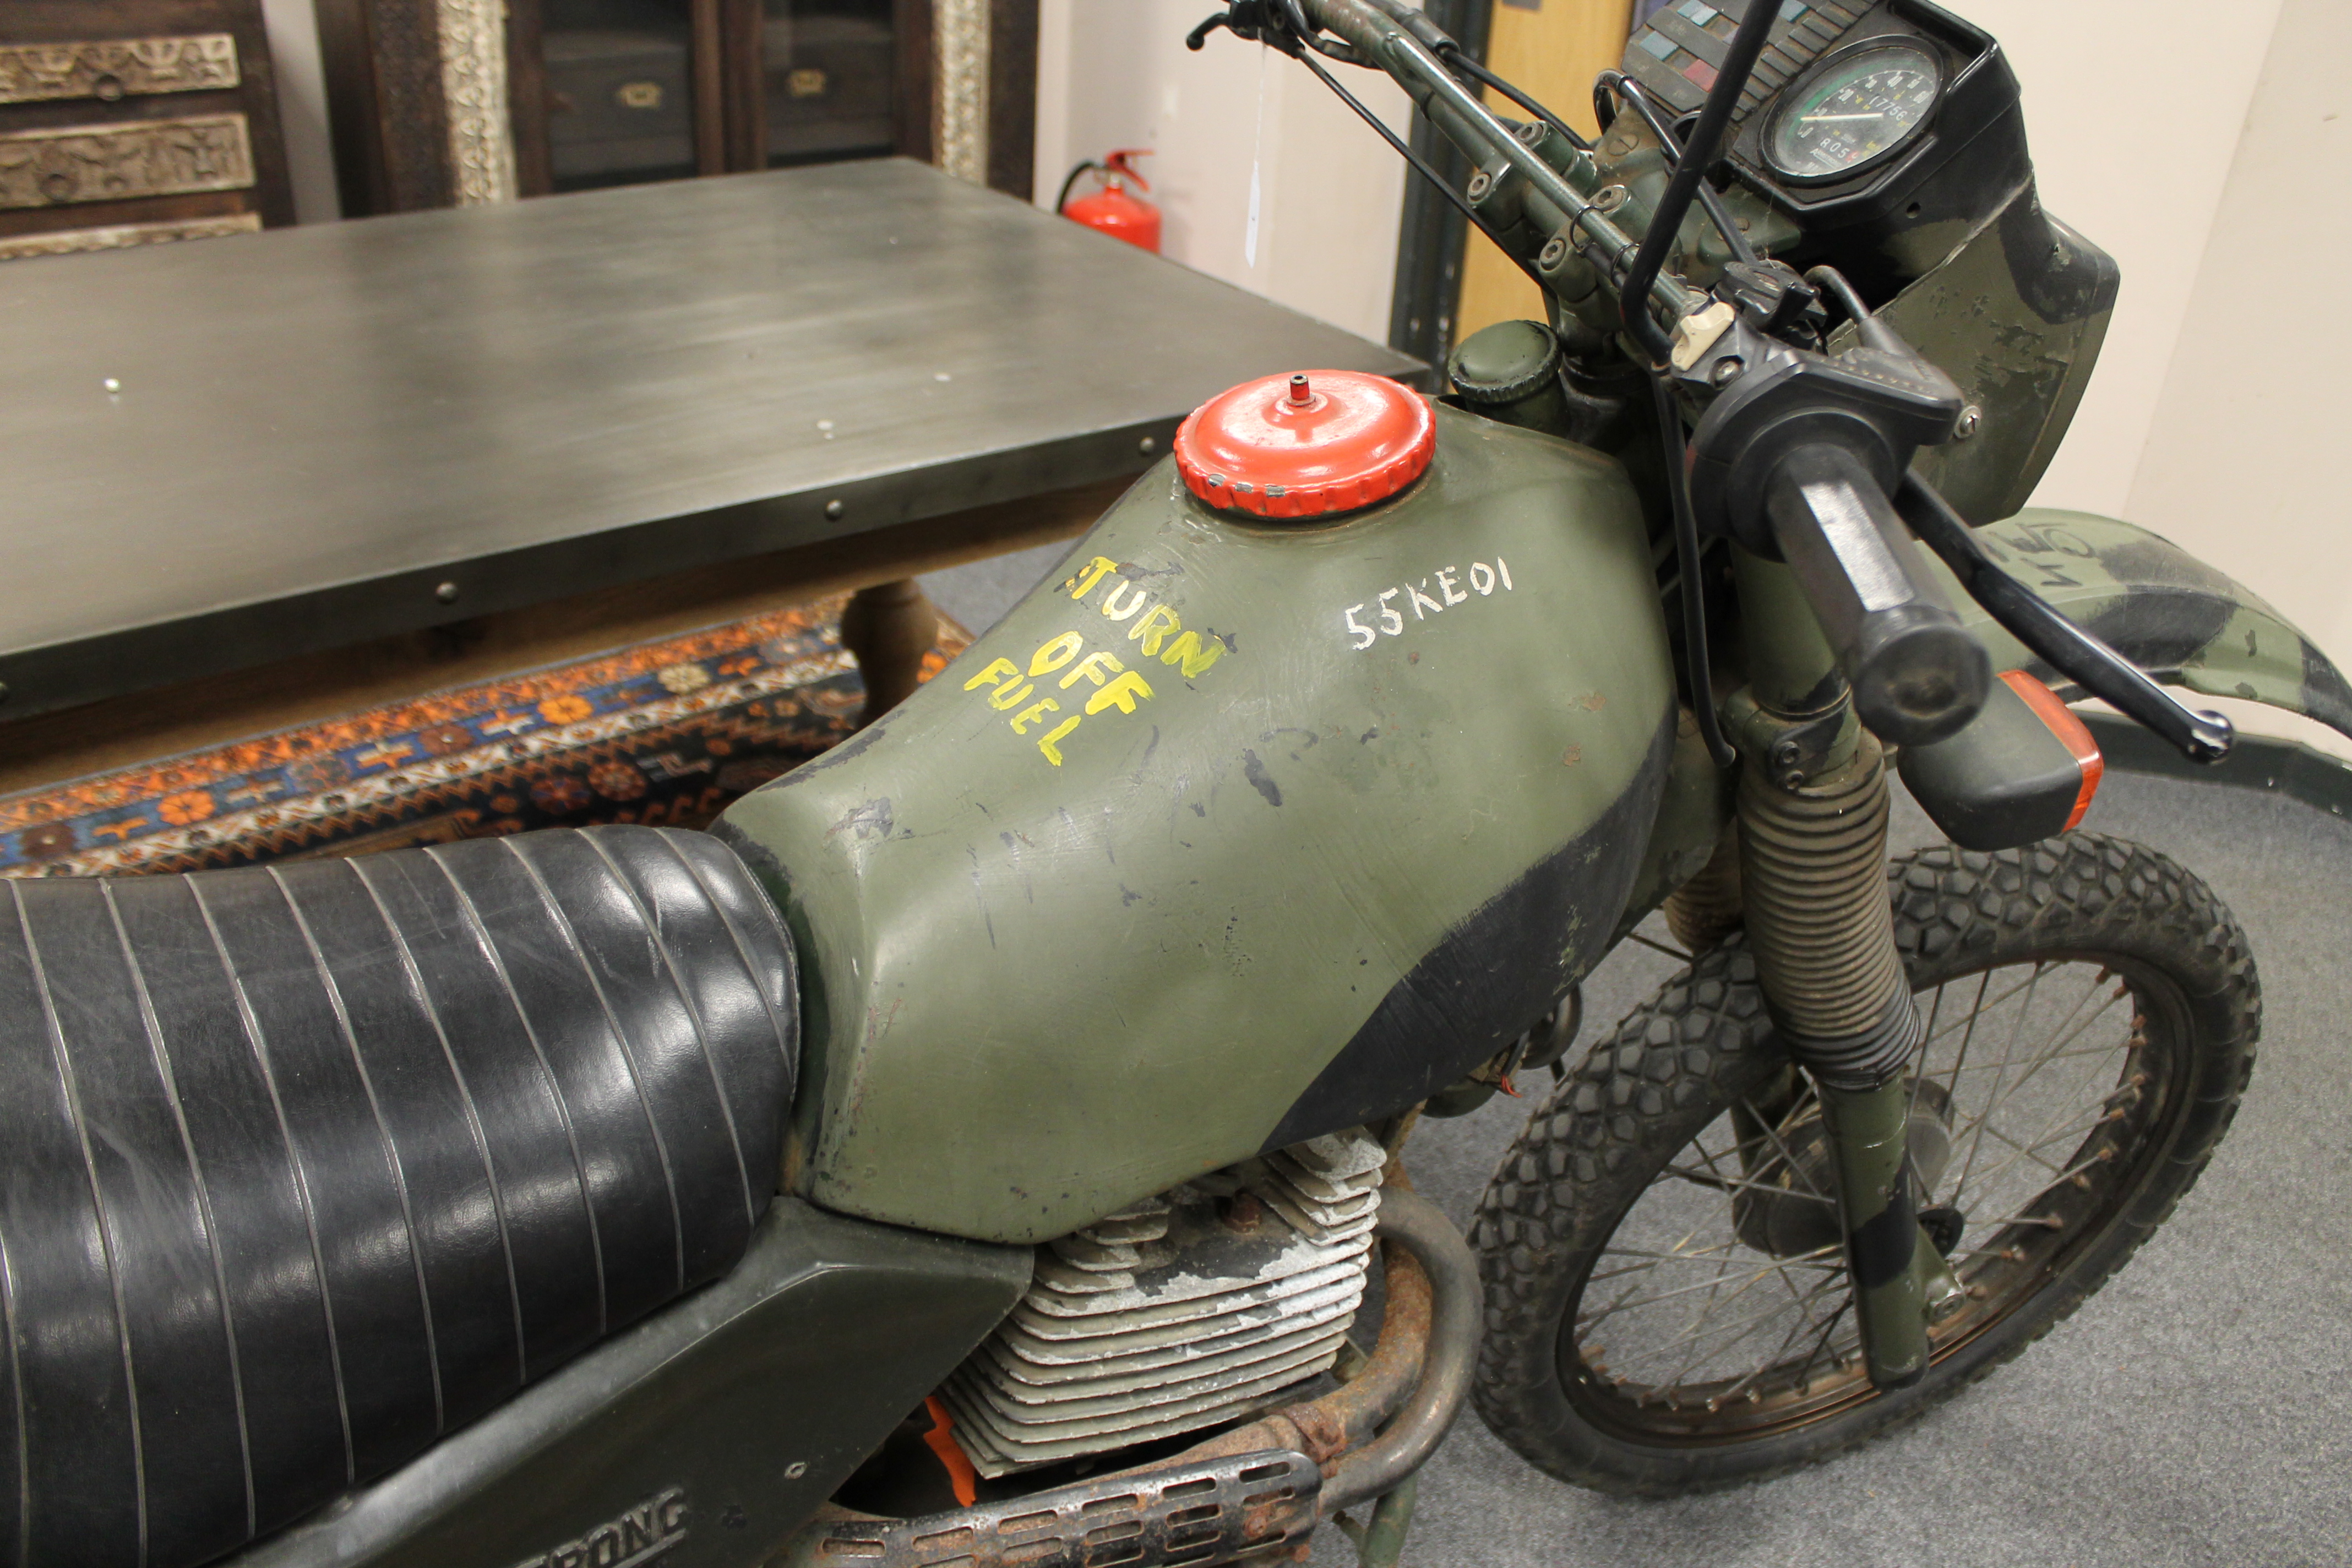 An Armstrong MT500 ex-British Army 500cc petrol motorcycle, colour green, registration D925 BRS, - Image 4 of 12